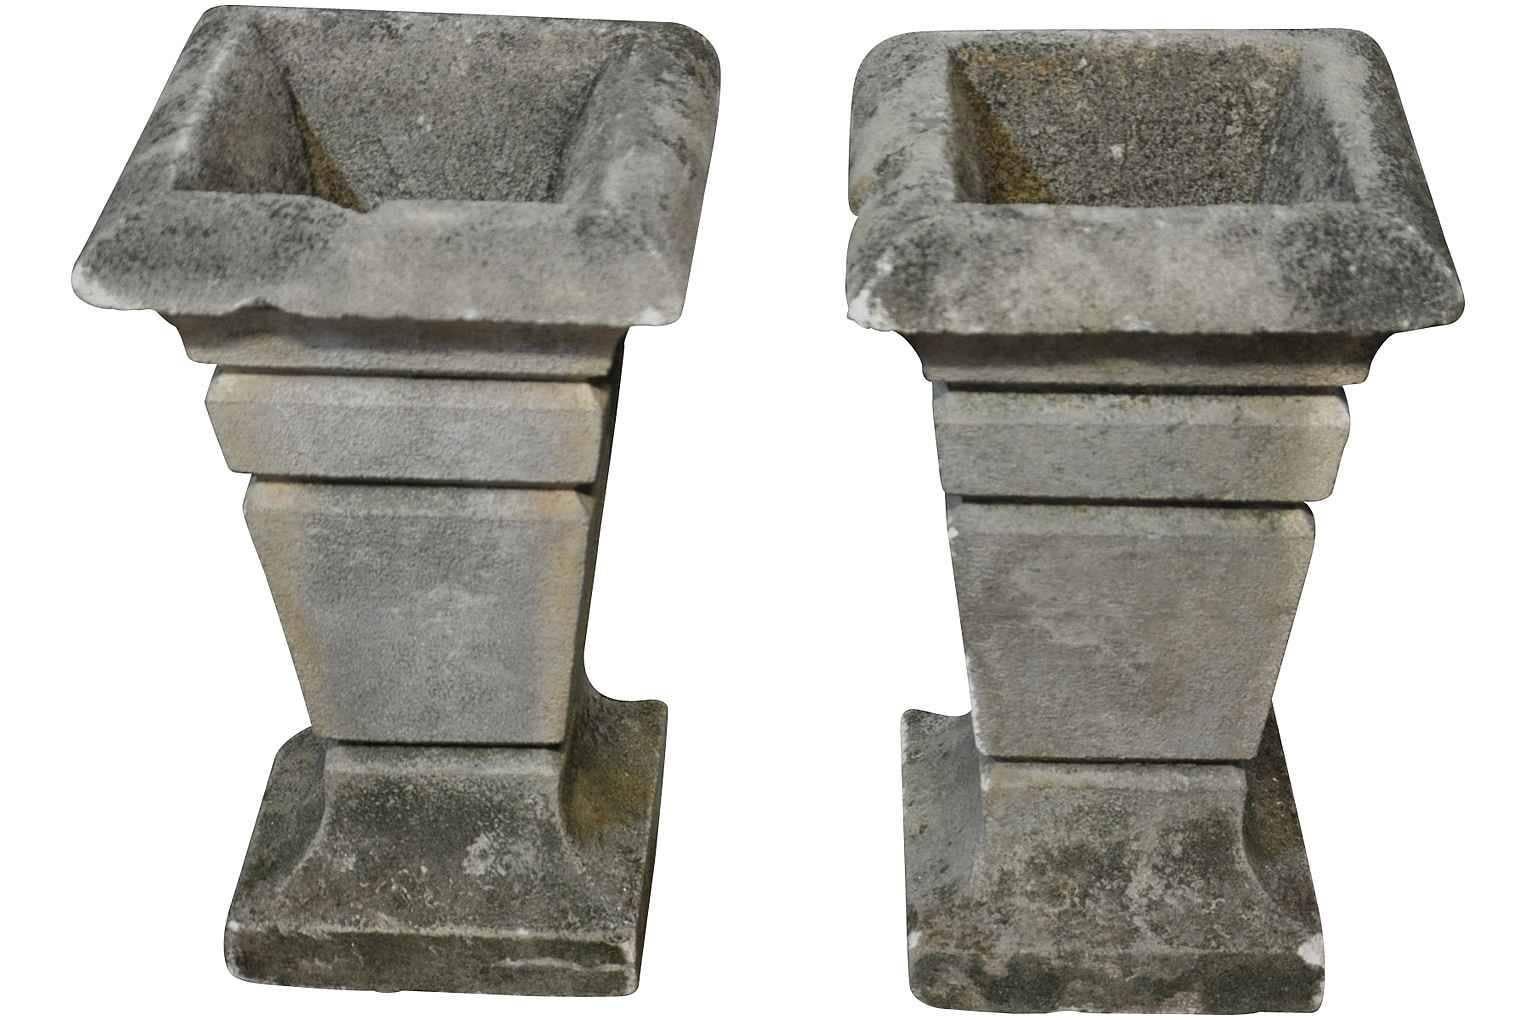 An elegant pair of early 19th century French Art Deco carved stone jardinières. This pair of stone planters will be outstanding whether used indoors or outdoors.